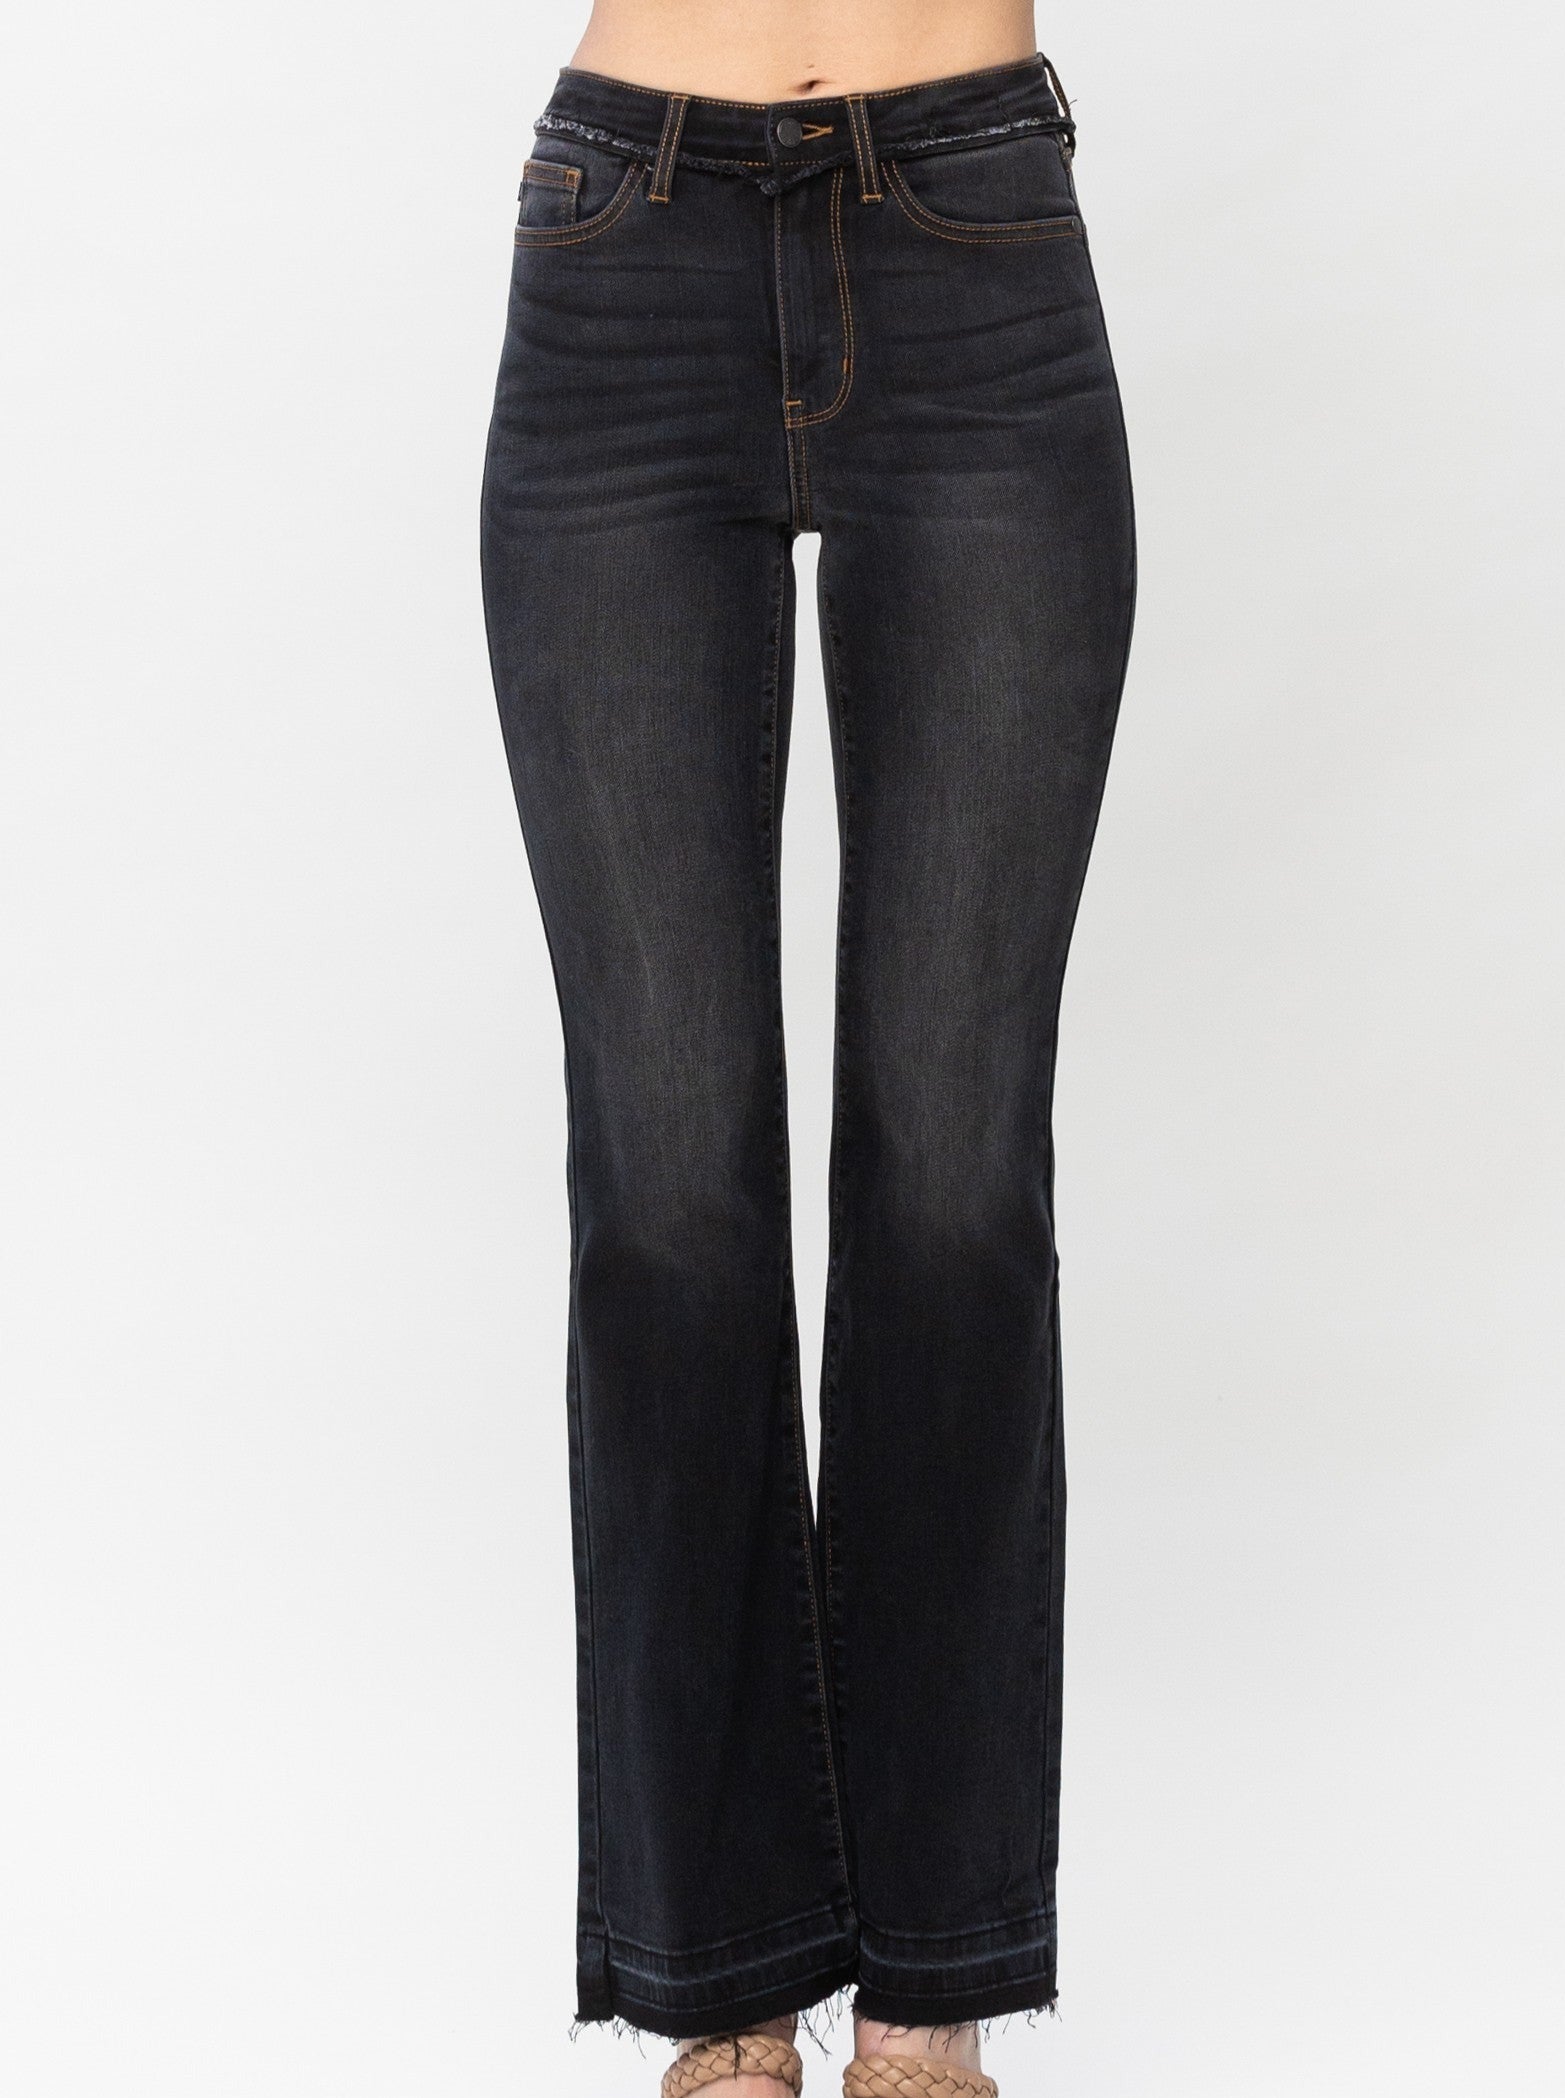 Black High Waist Release Hem Slim Bootcut - Judy Blue  Slim Boot Cut Release Hem High Waist FRONT RISE: 10.63" INSEAM: 32" 65% Cotton, 21%Rayon, 11% Poly, 3% Spandex Color: Black The Black High Waist Release Hem Slim Bootcut by Judy Blue is perfect for a day out. These stylish boot cut jeans feature a modern slim fit, high waist and flattering release hem. Get ready to look your best anytime, anywhere.